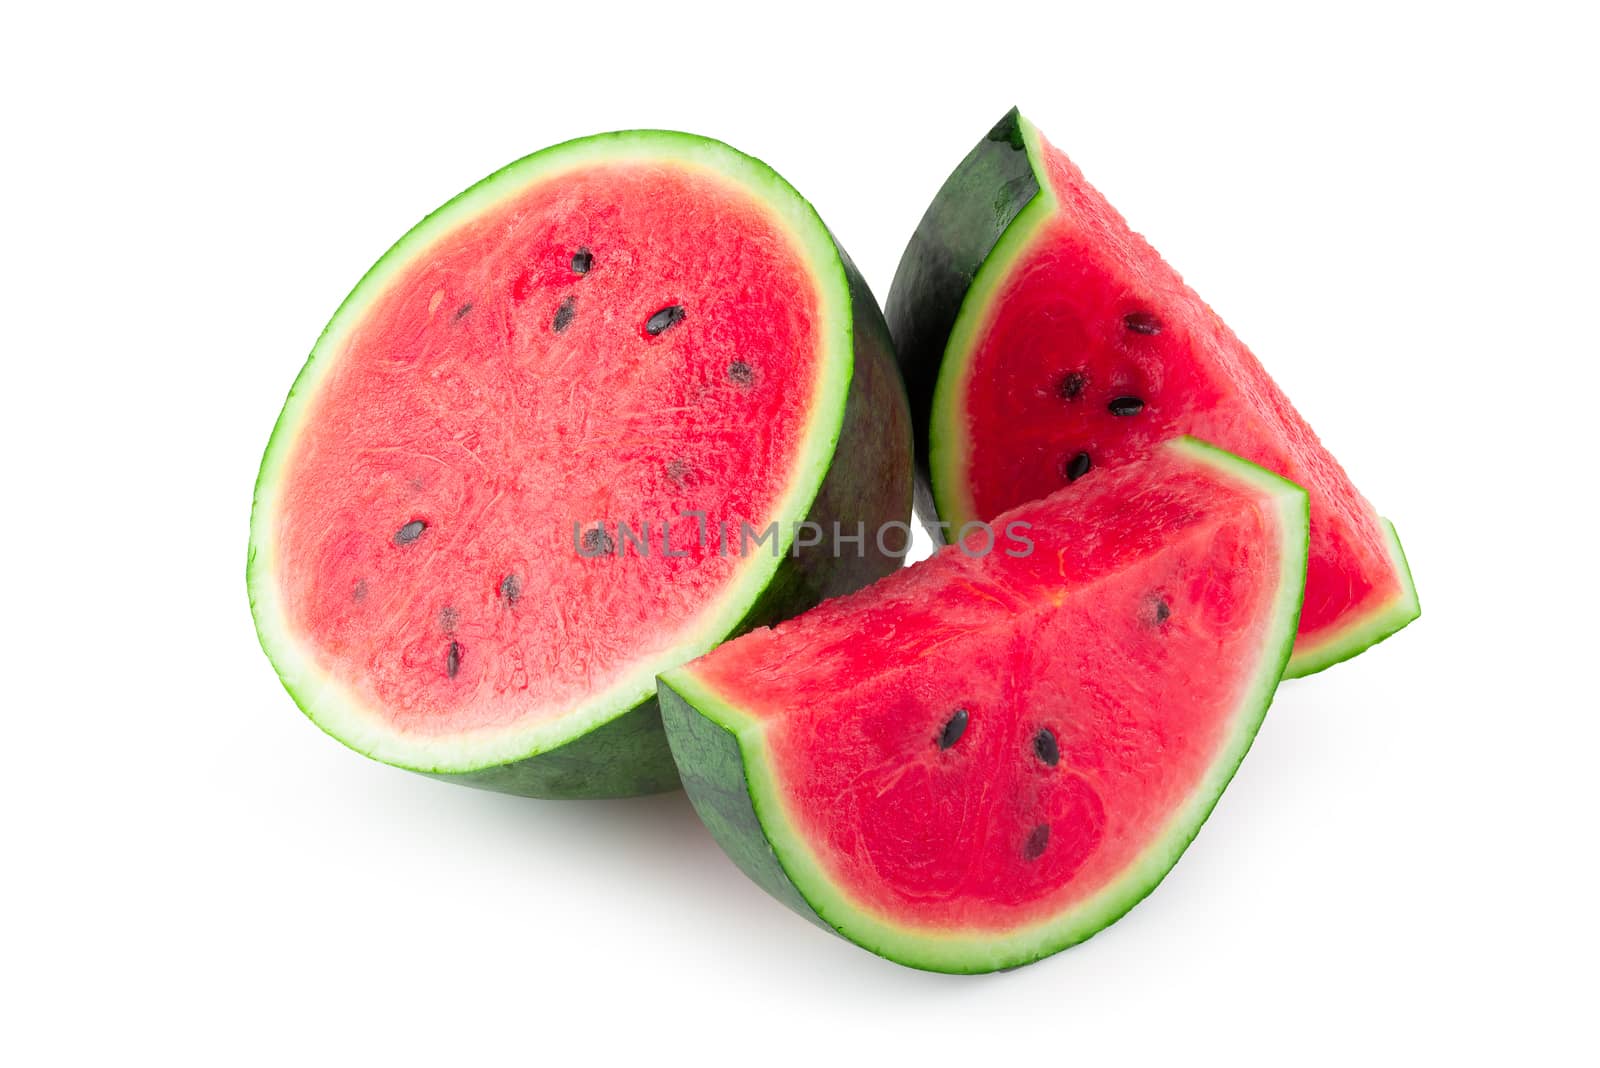 Sliced of watermelon isolated on white background by kaiskynet